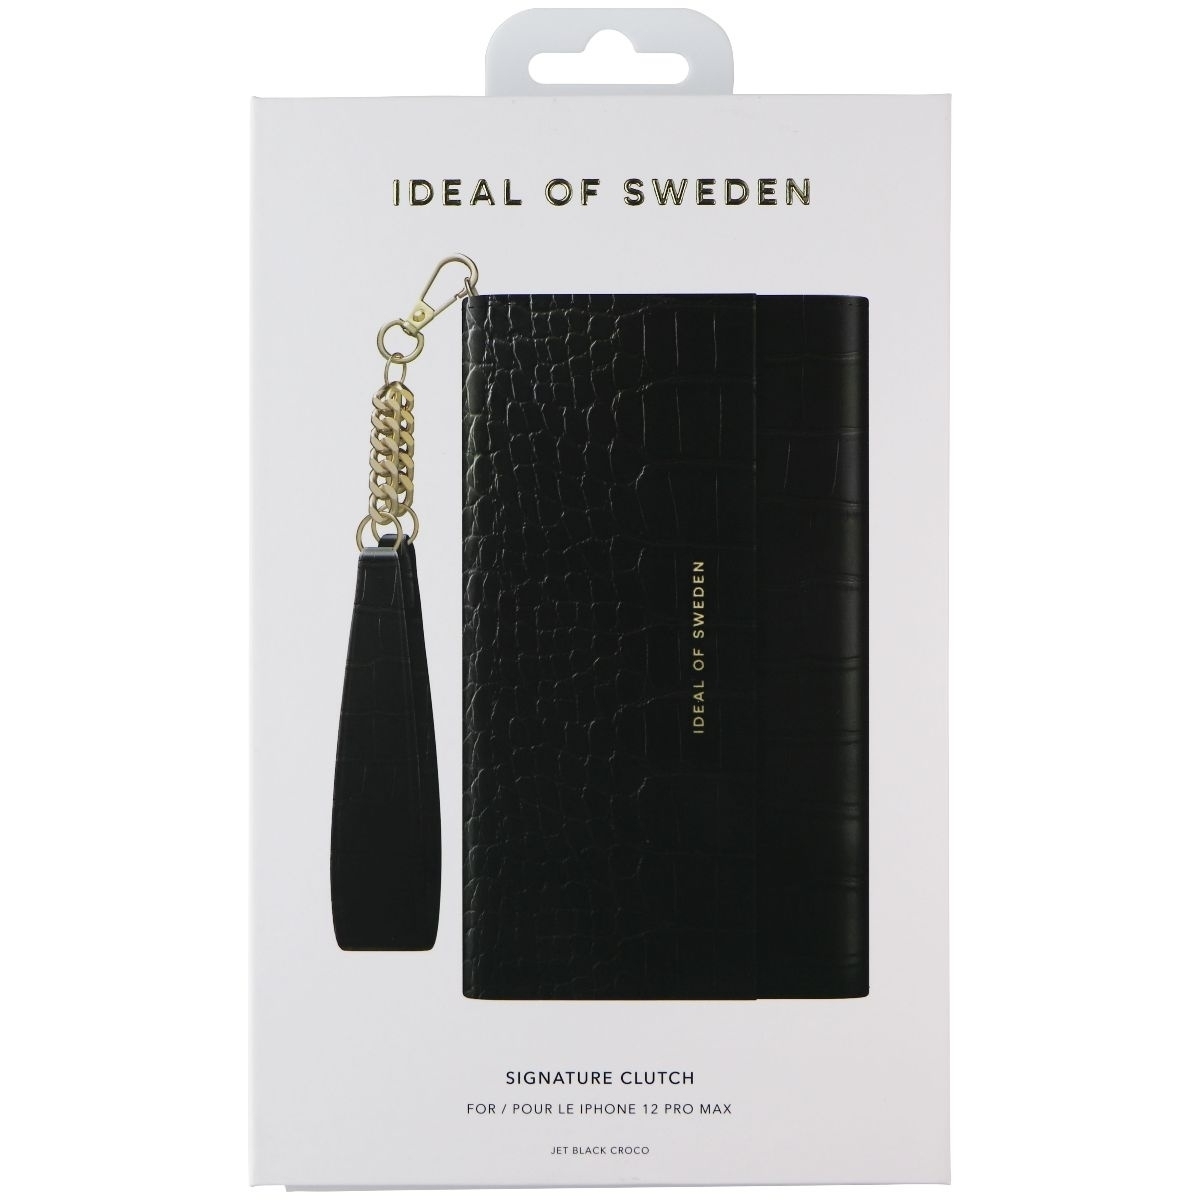 IDeal Of Sweden Signature Clutch Case For IPhone 12 Pro Max - Jet Black Croco